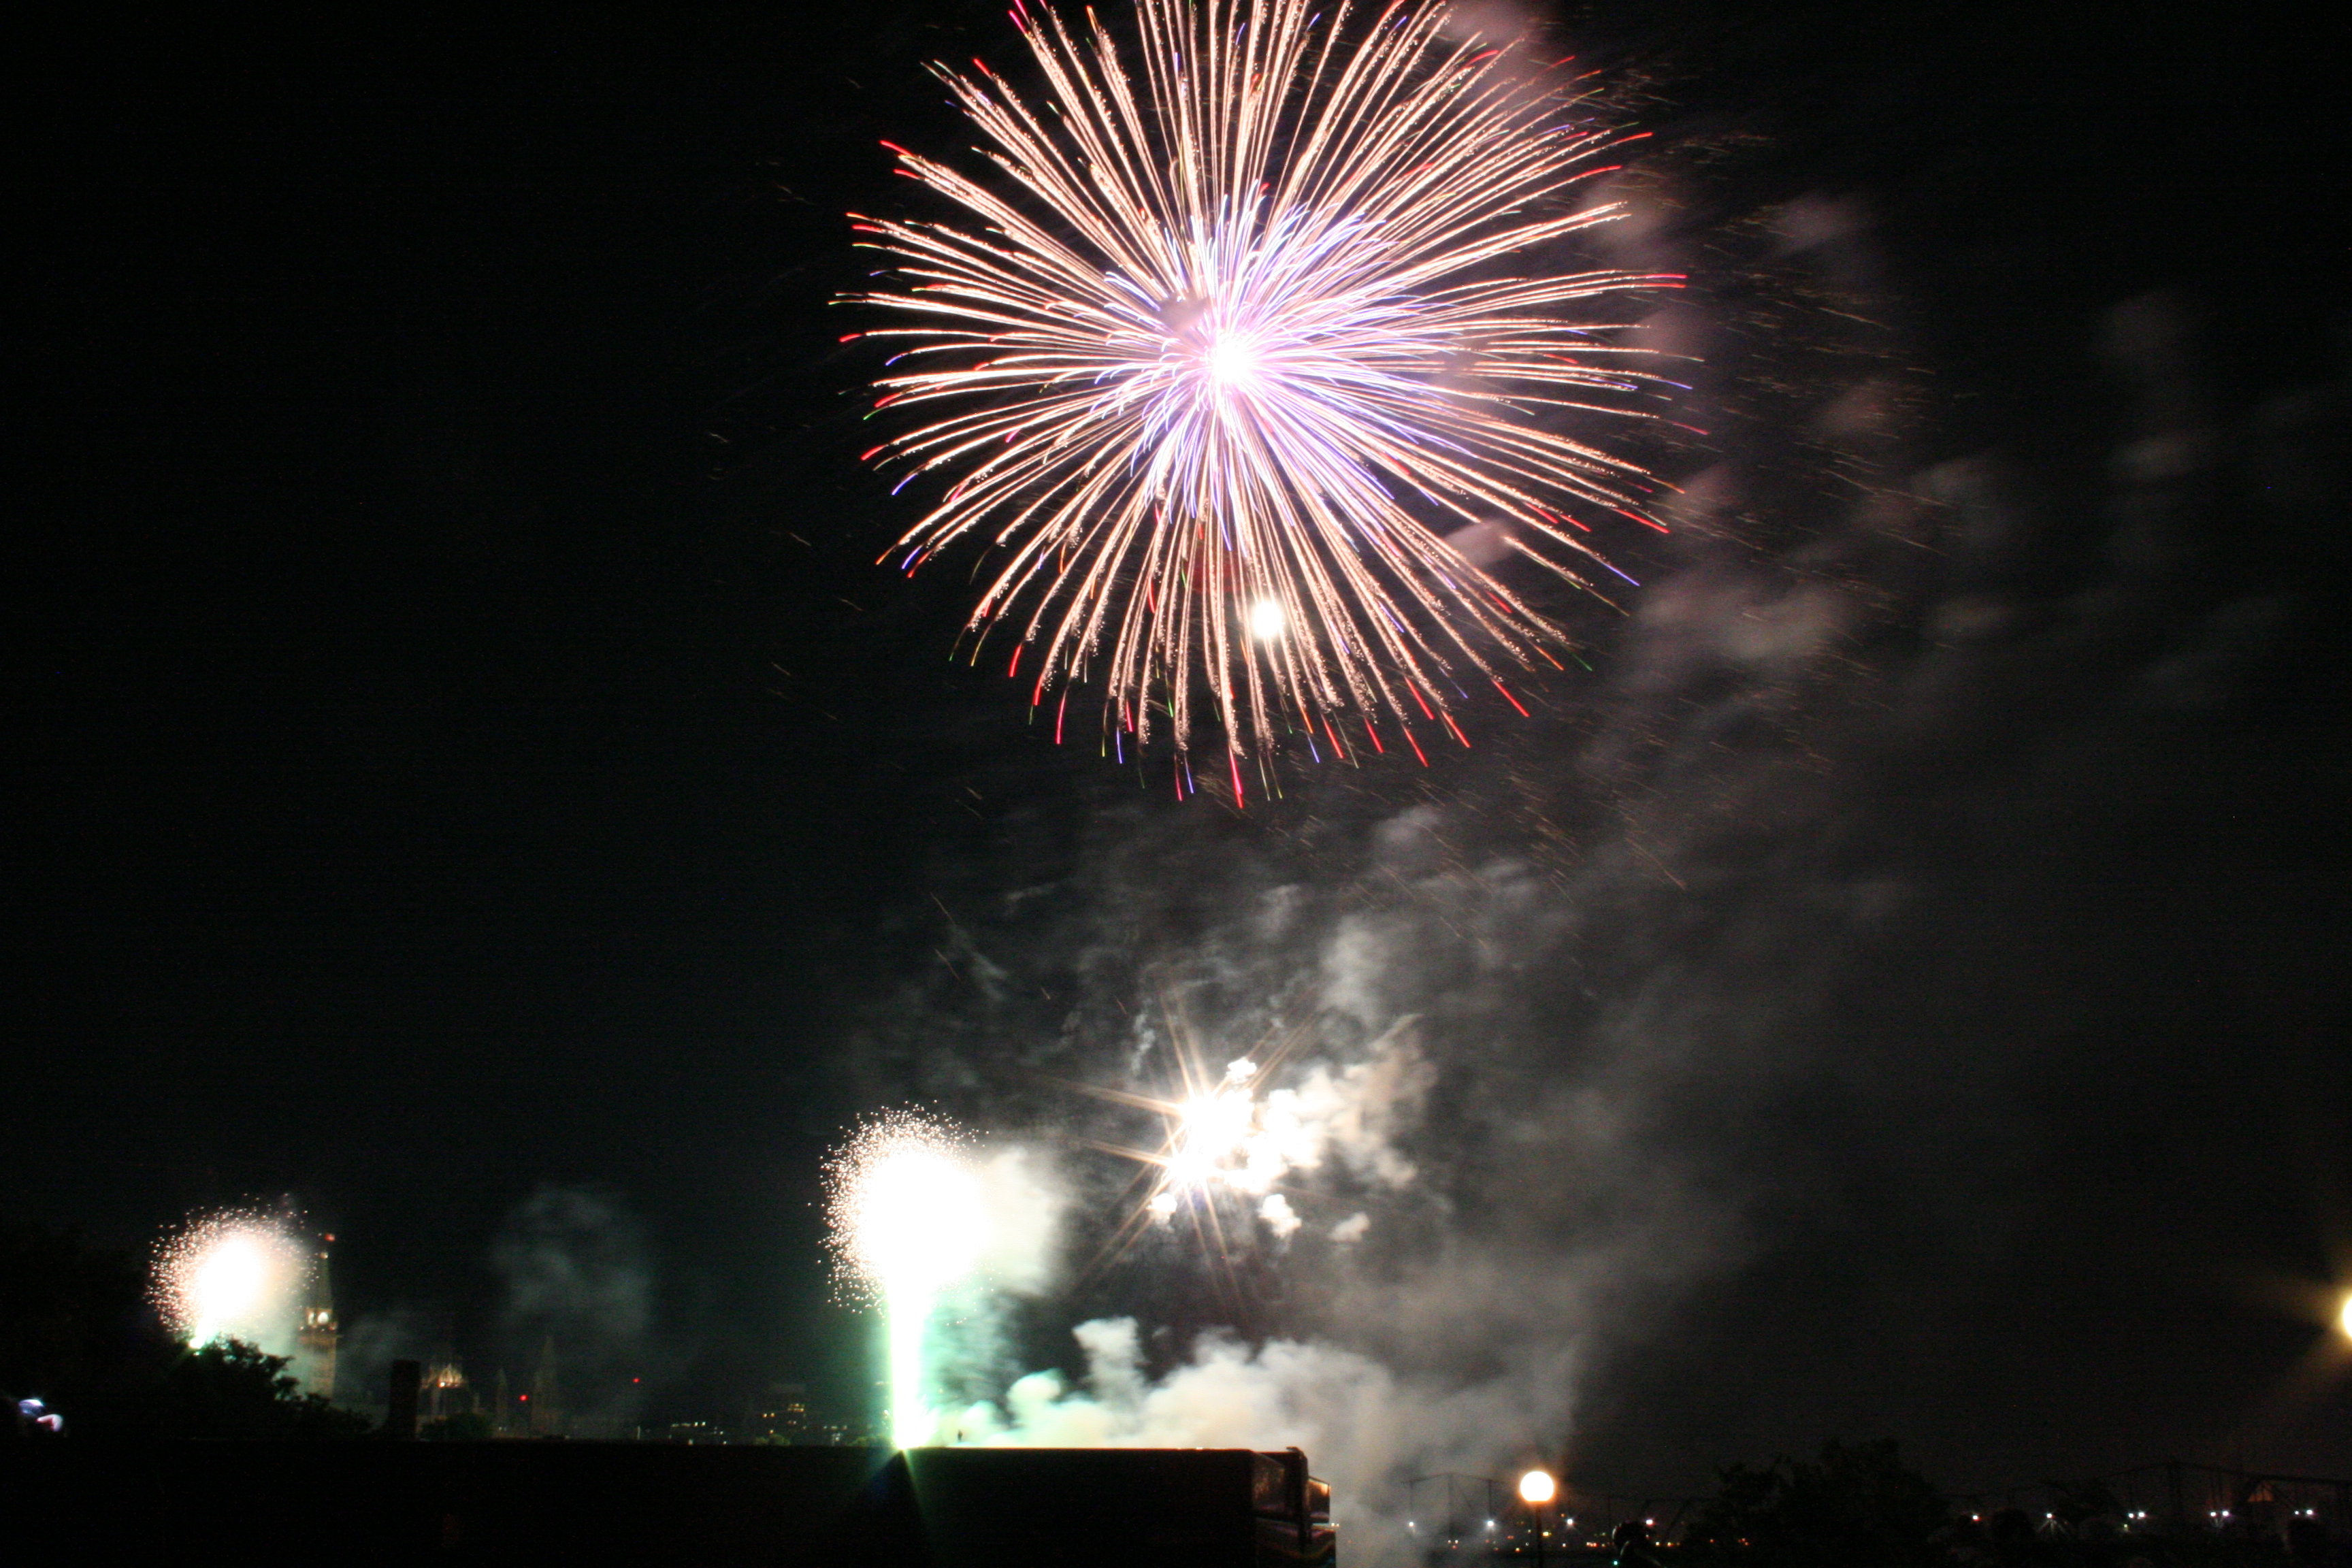 Fireworks from Rideau Falls Park in Ottawa, Ontario.